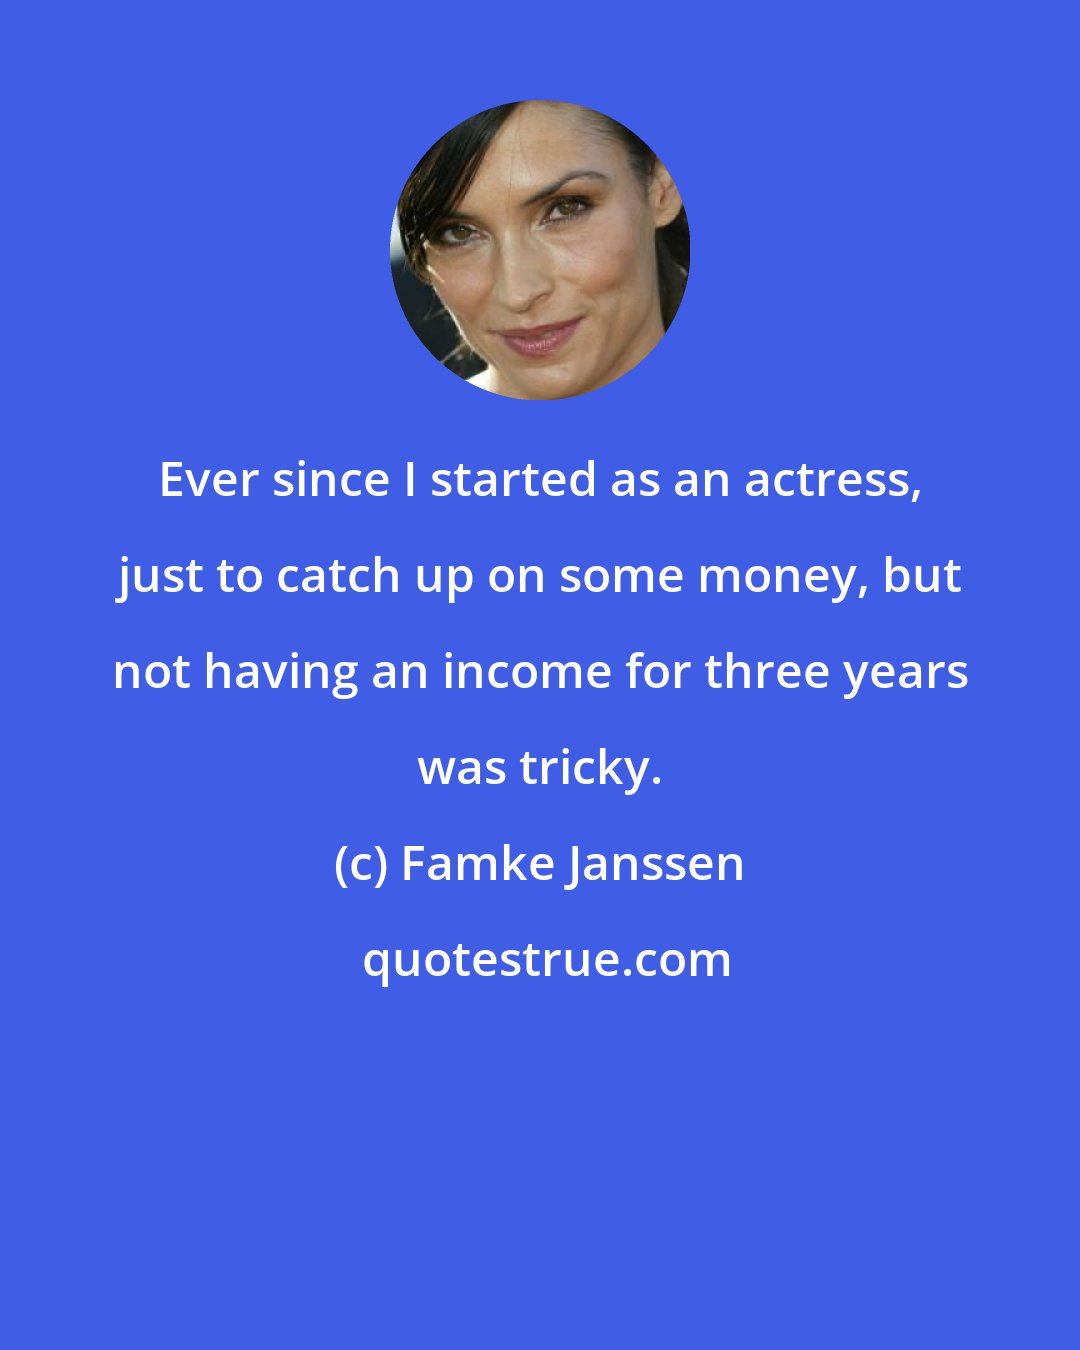 Famke Janssen: Ever since I started as an actress, just to catch up on some money, but not having an income for three years was tricky.